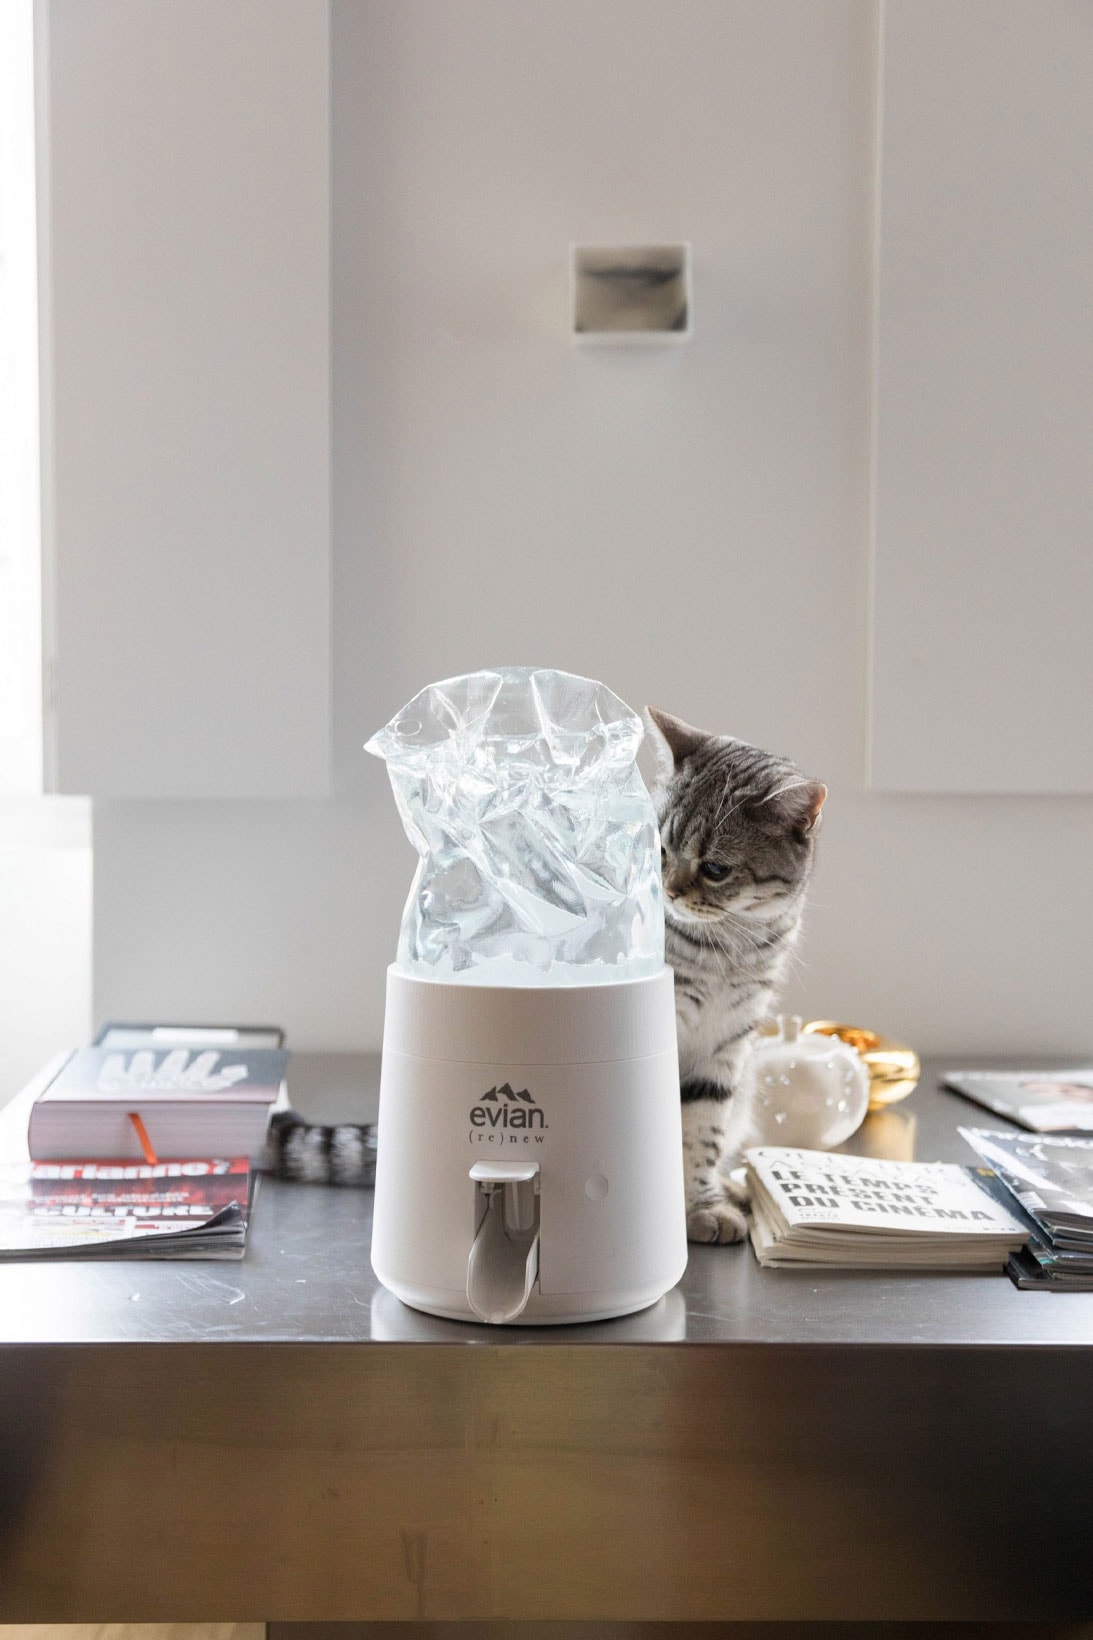 virgil abloh renew water fountain design sustainable cat